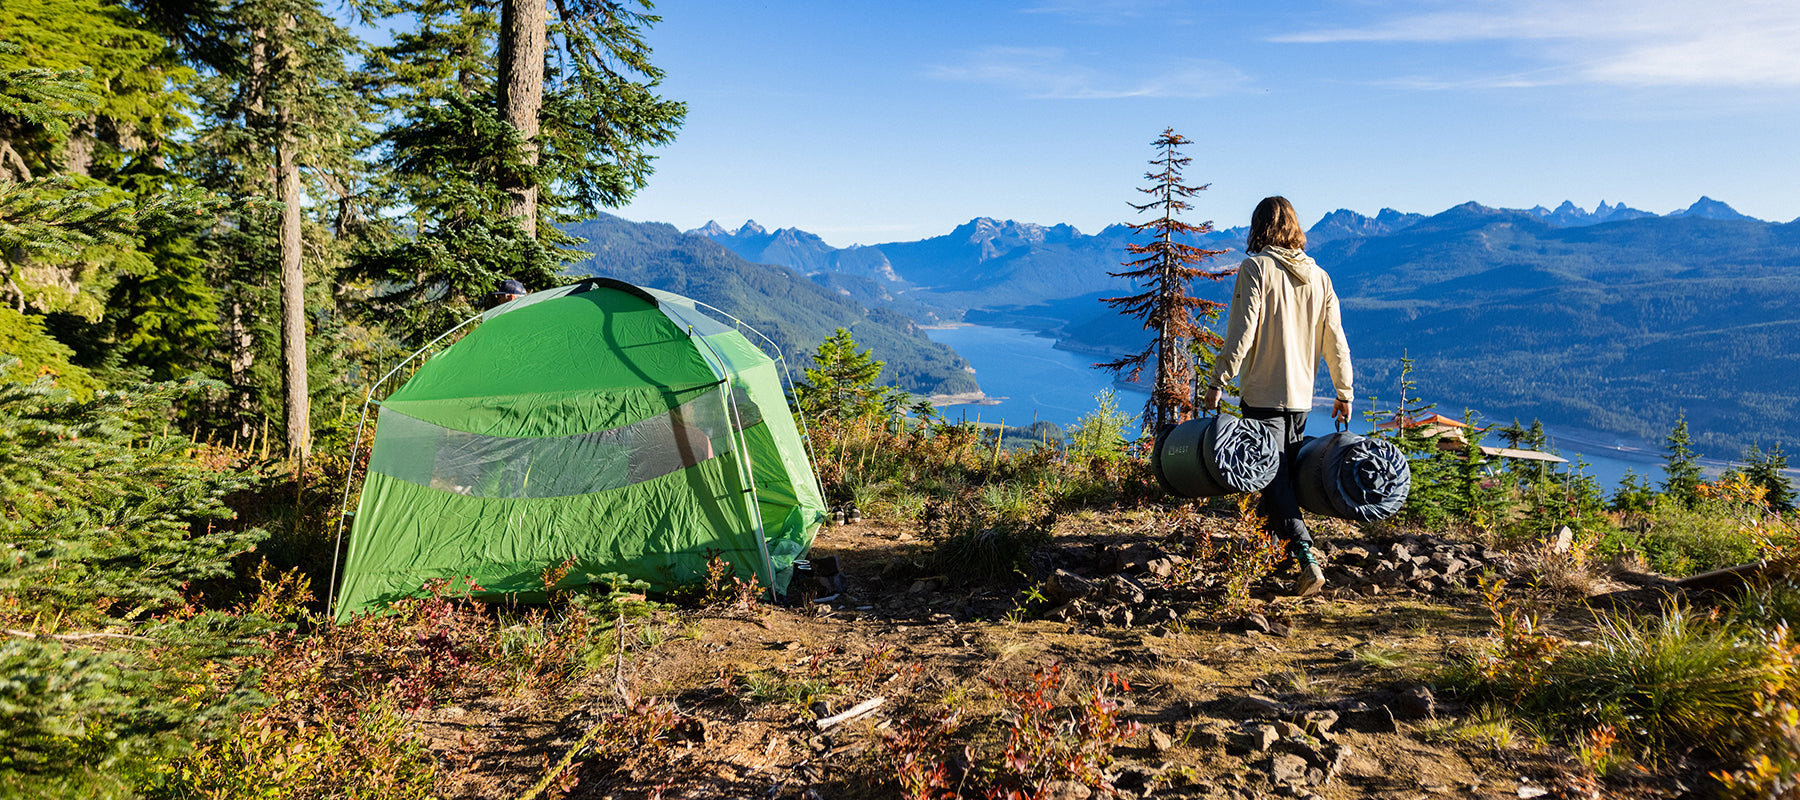 7 Tips to Sleep Better in a Tent